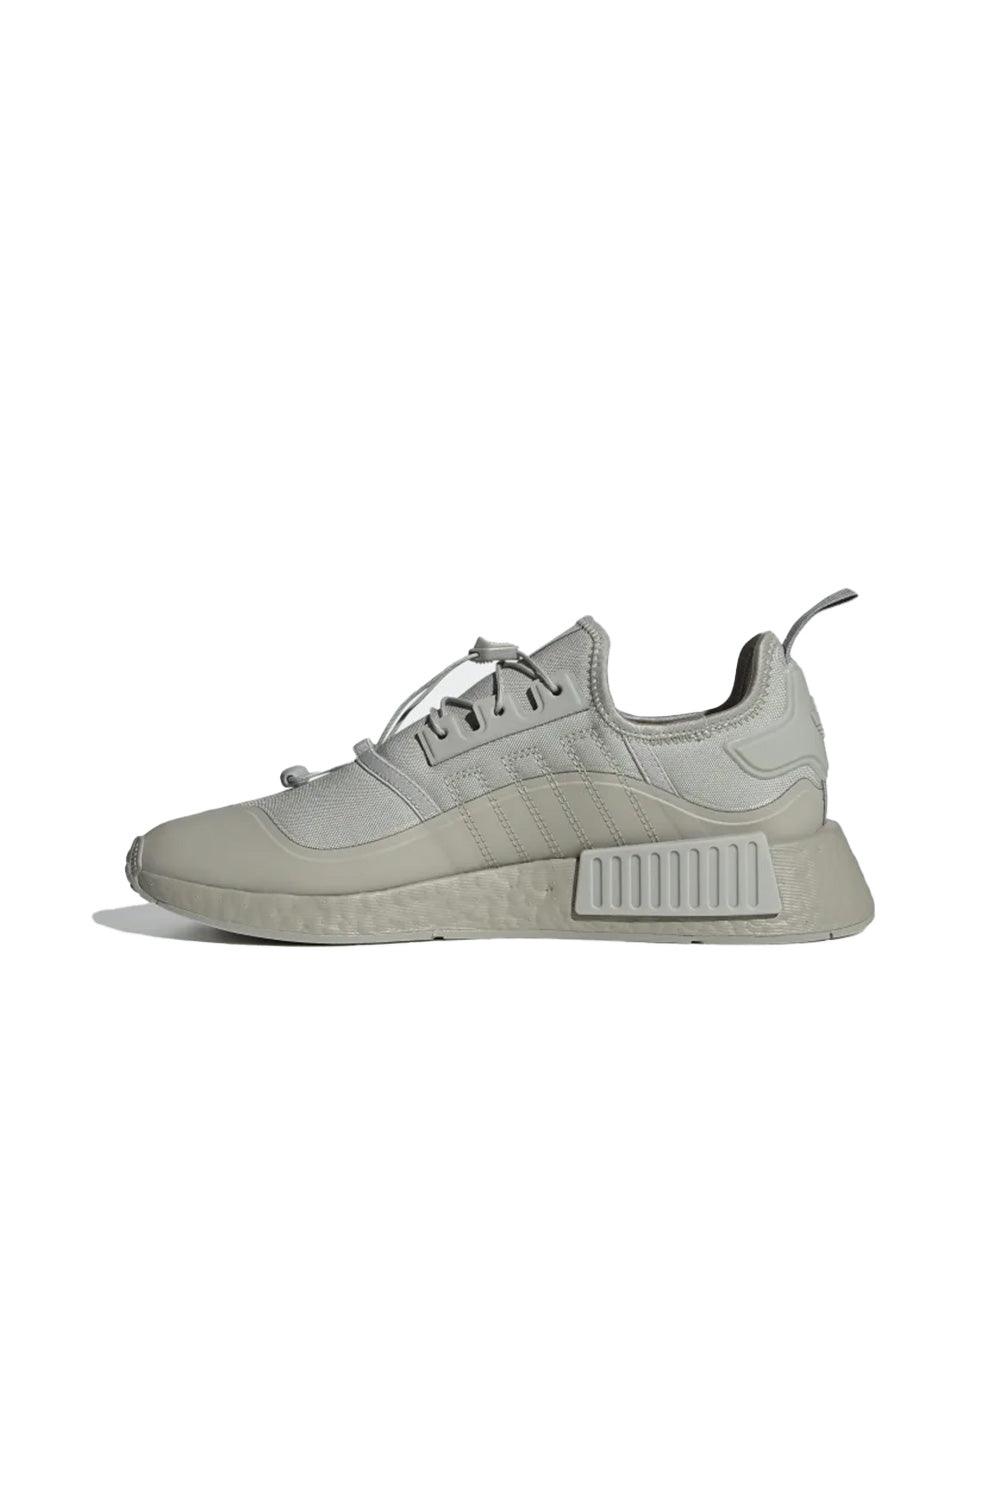 Adidas | NMD_R1 TR Sneaker 4 | Milagron